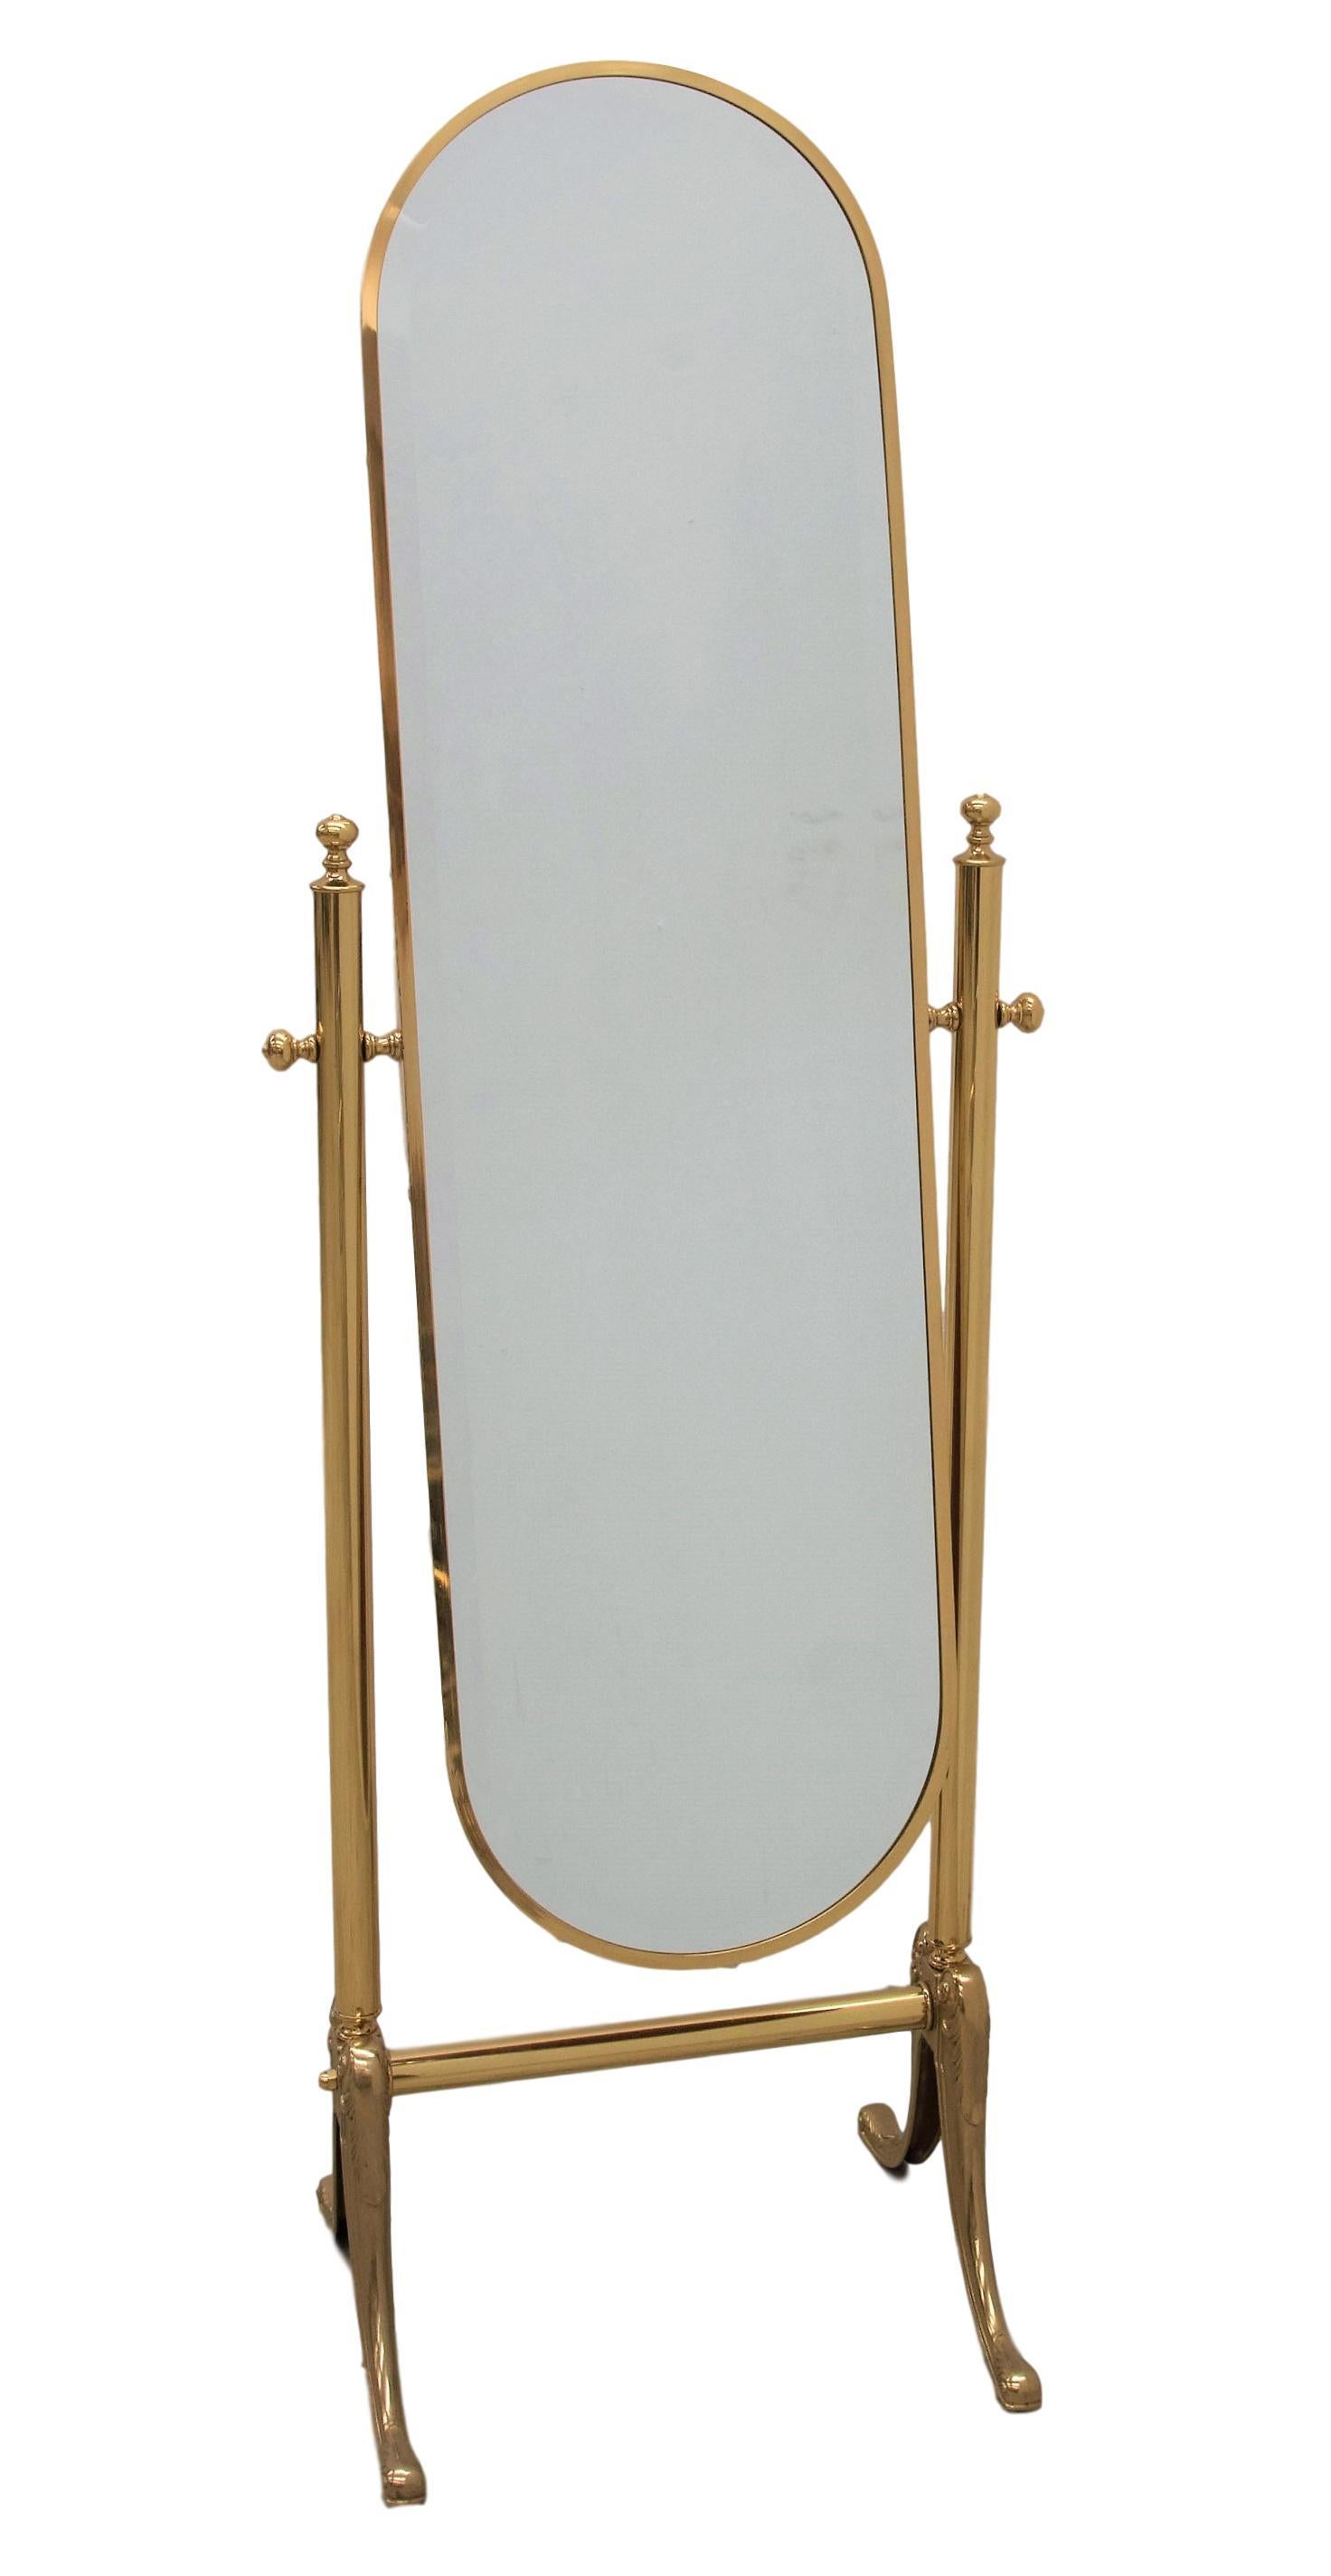 Beautiful brass full-length floor cheval mirror, manufactured in the 1980s in Italy. The mirror can be rotated according to the preferred angle. The conditions are excellent, with very minor fading and great timeless patina.

A great piece that